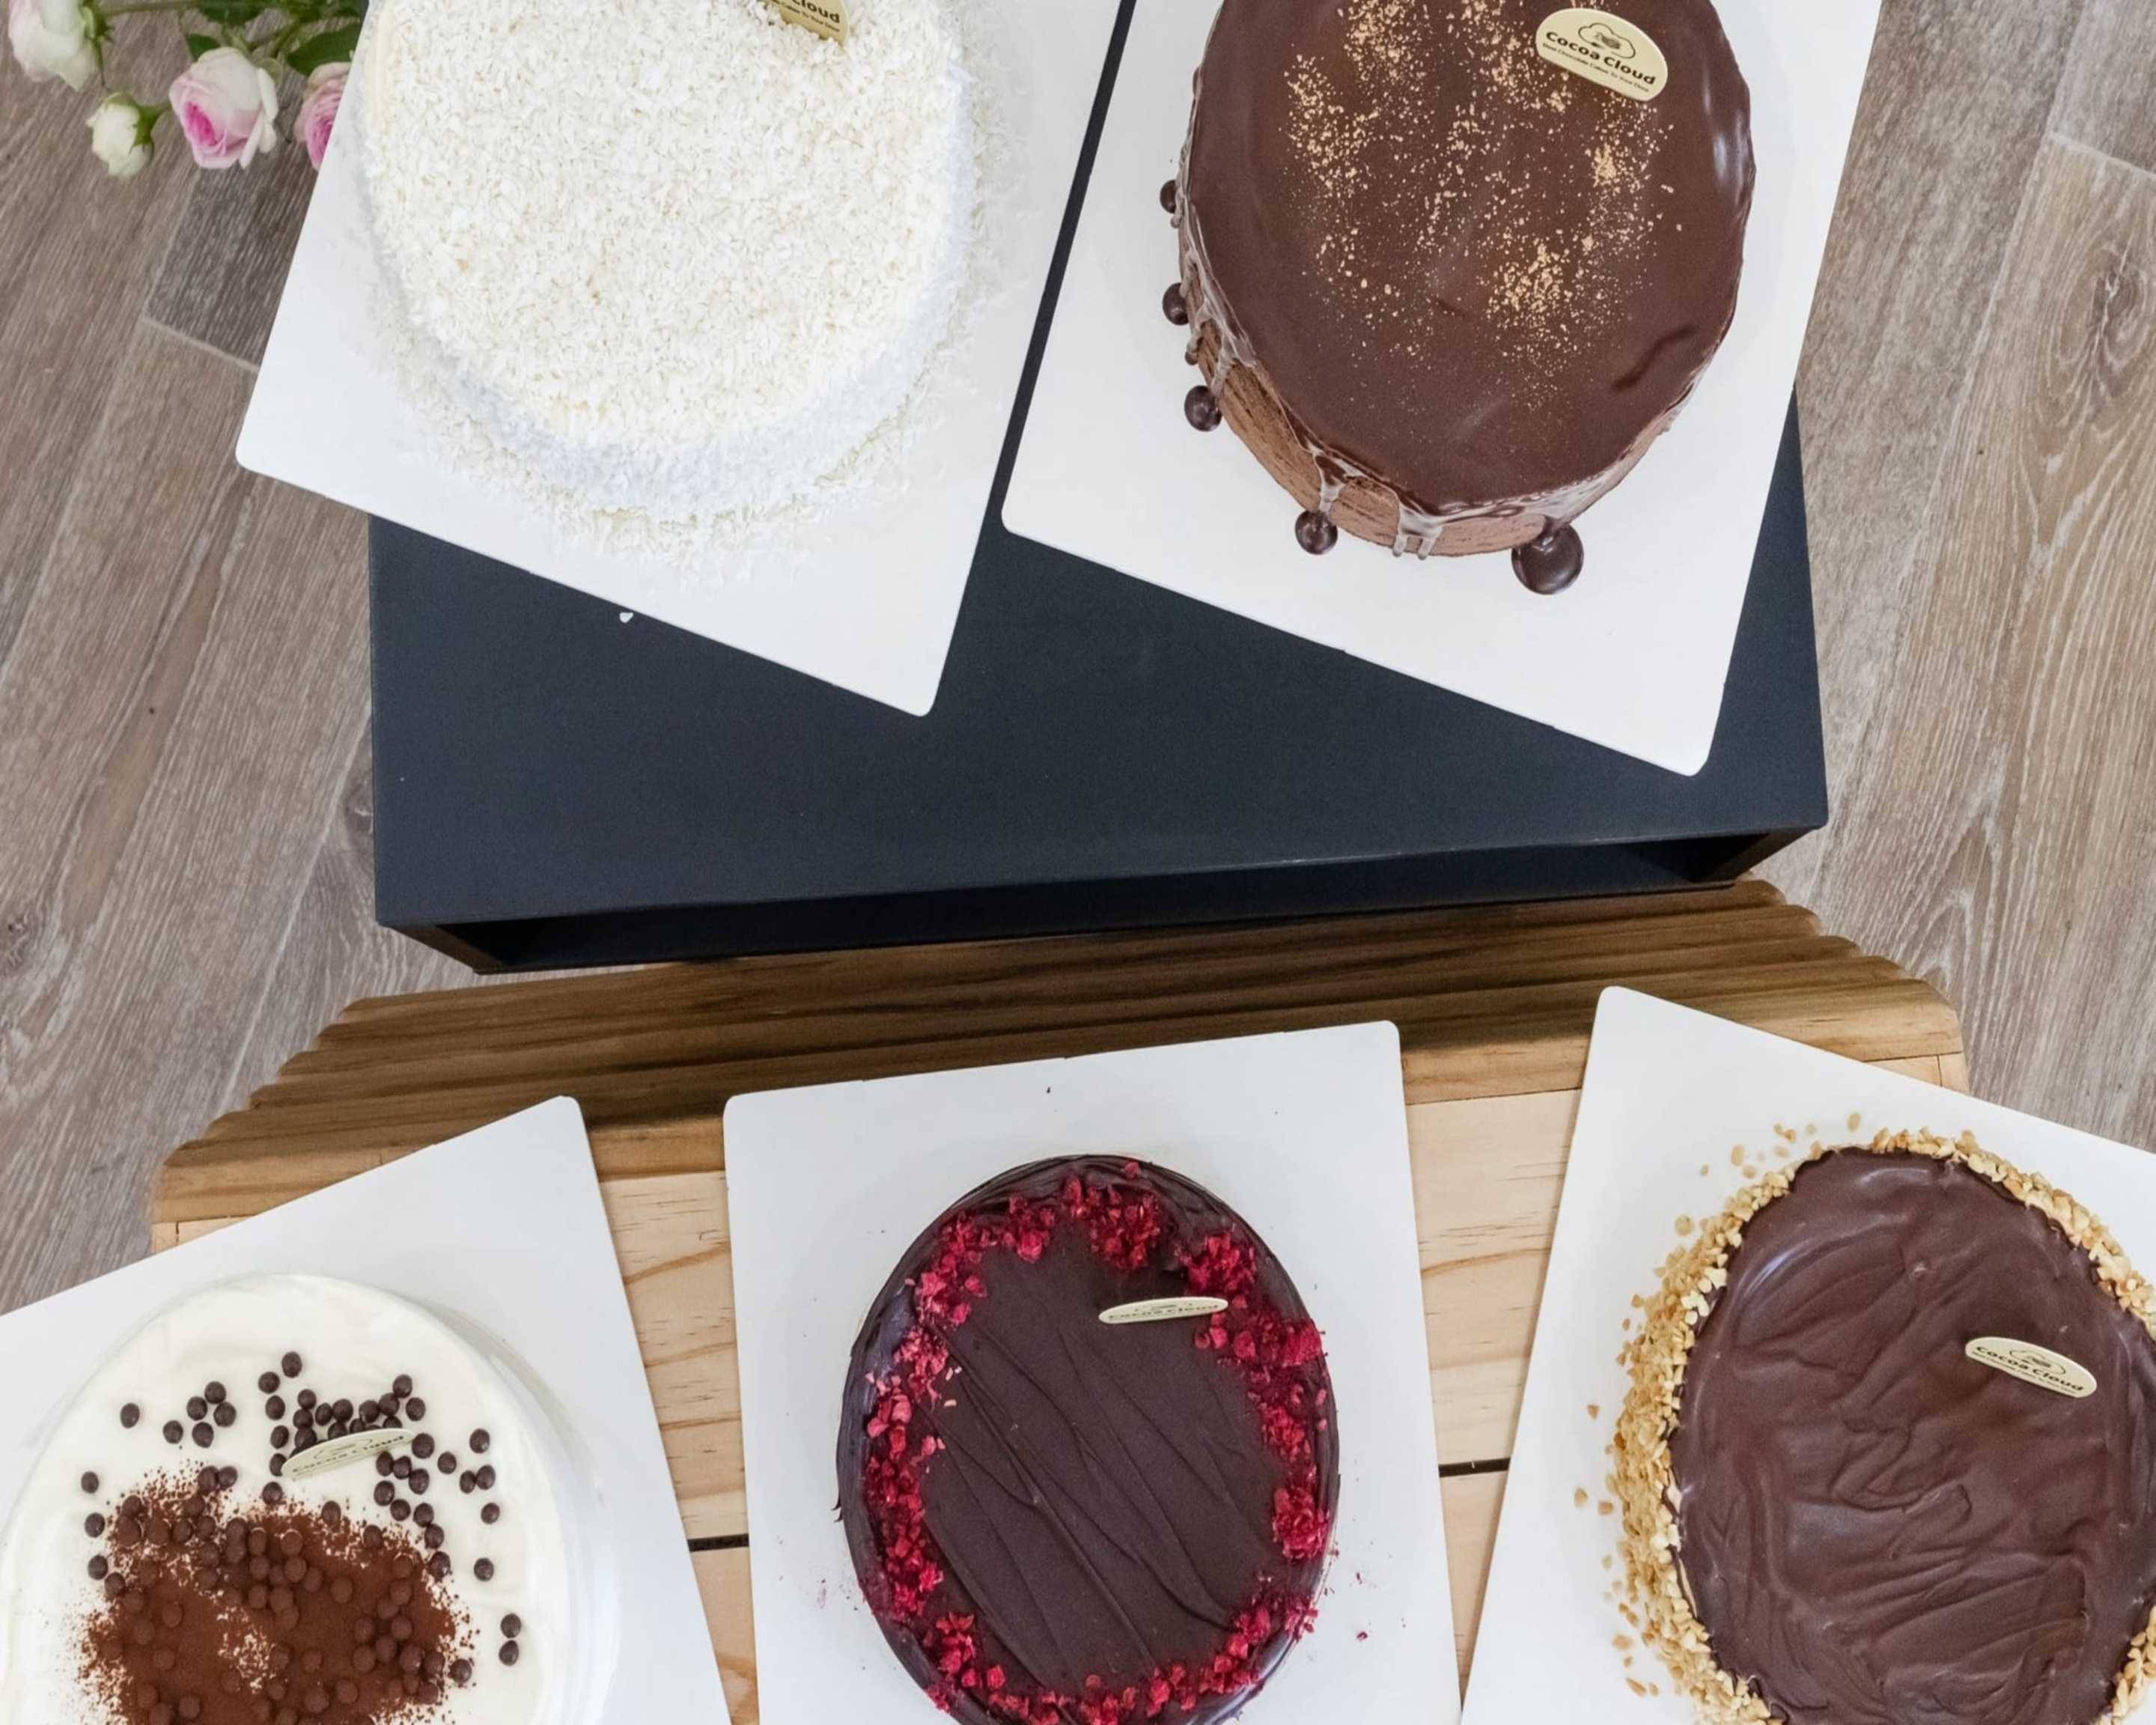 Find Auckland's Best Cakes & Cake Shops | HOTC